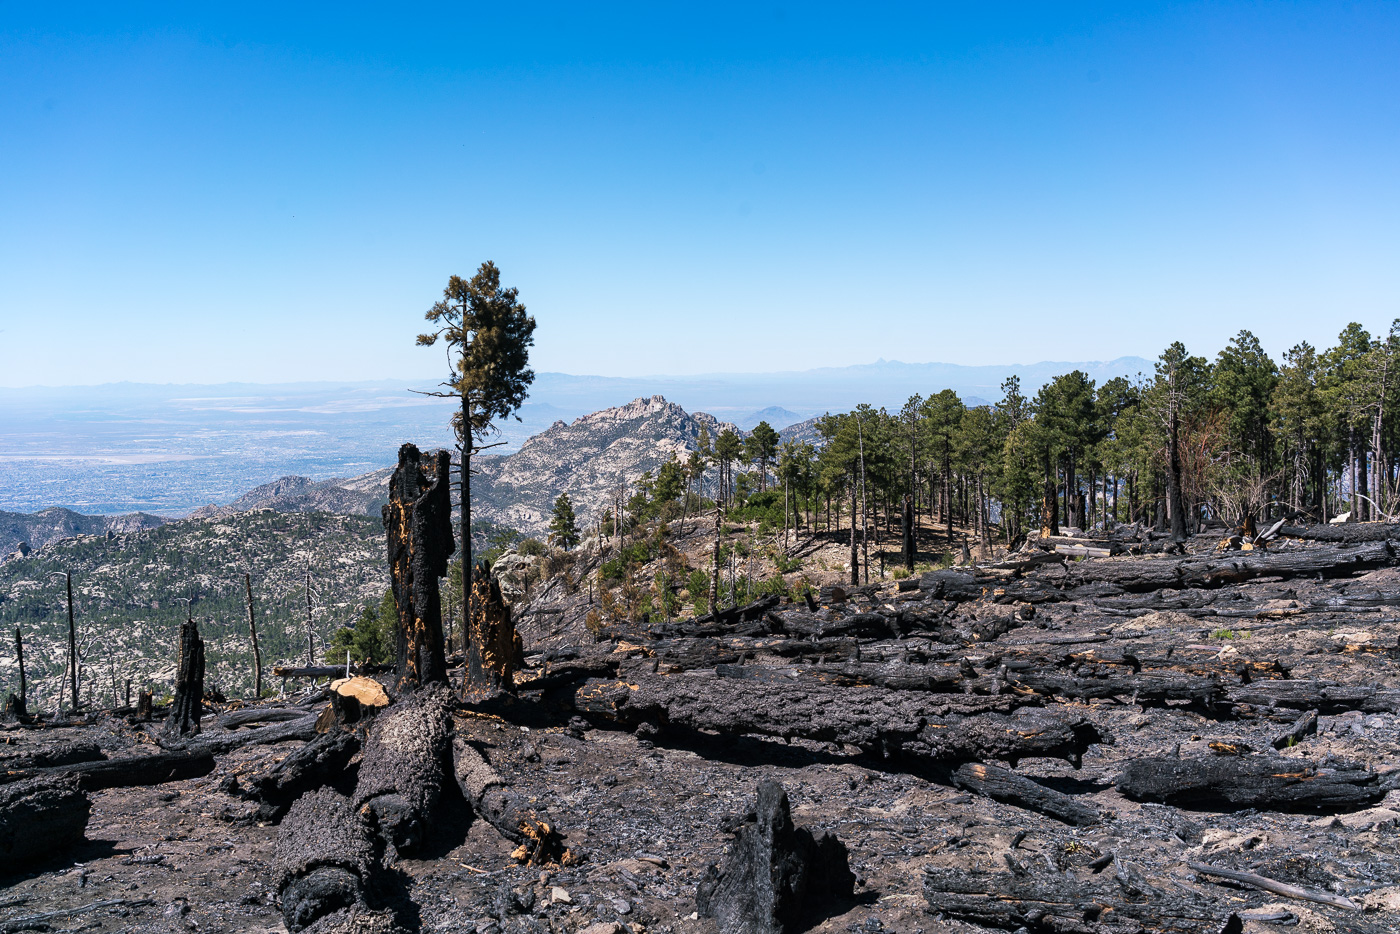 Fire damage along the Mount Lemmon Trail - probably from the Shovel Fire. May 2017.